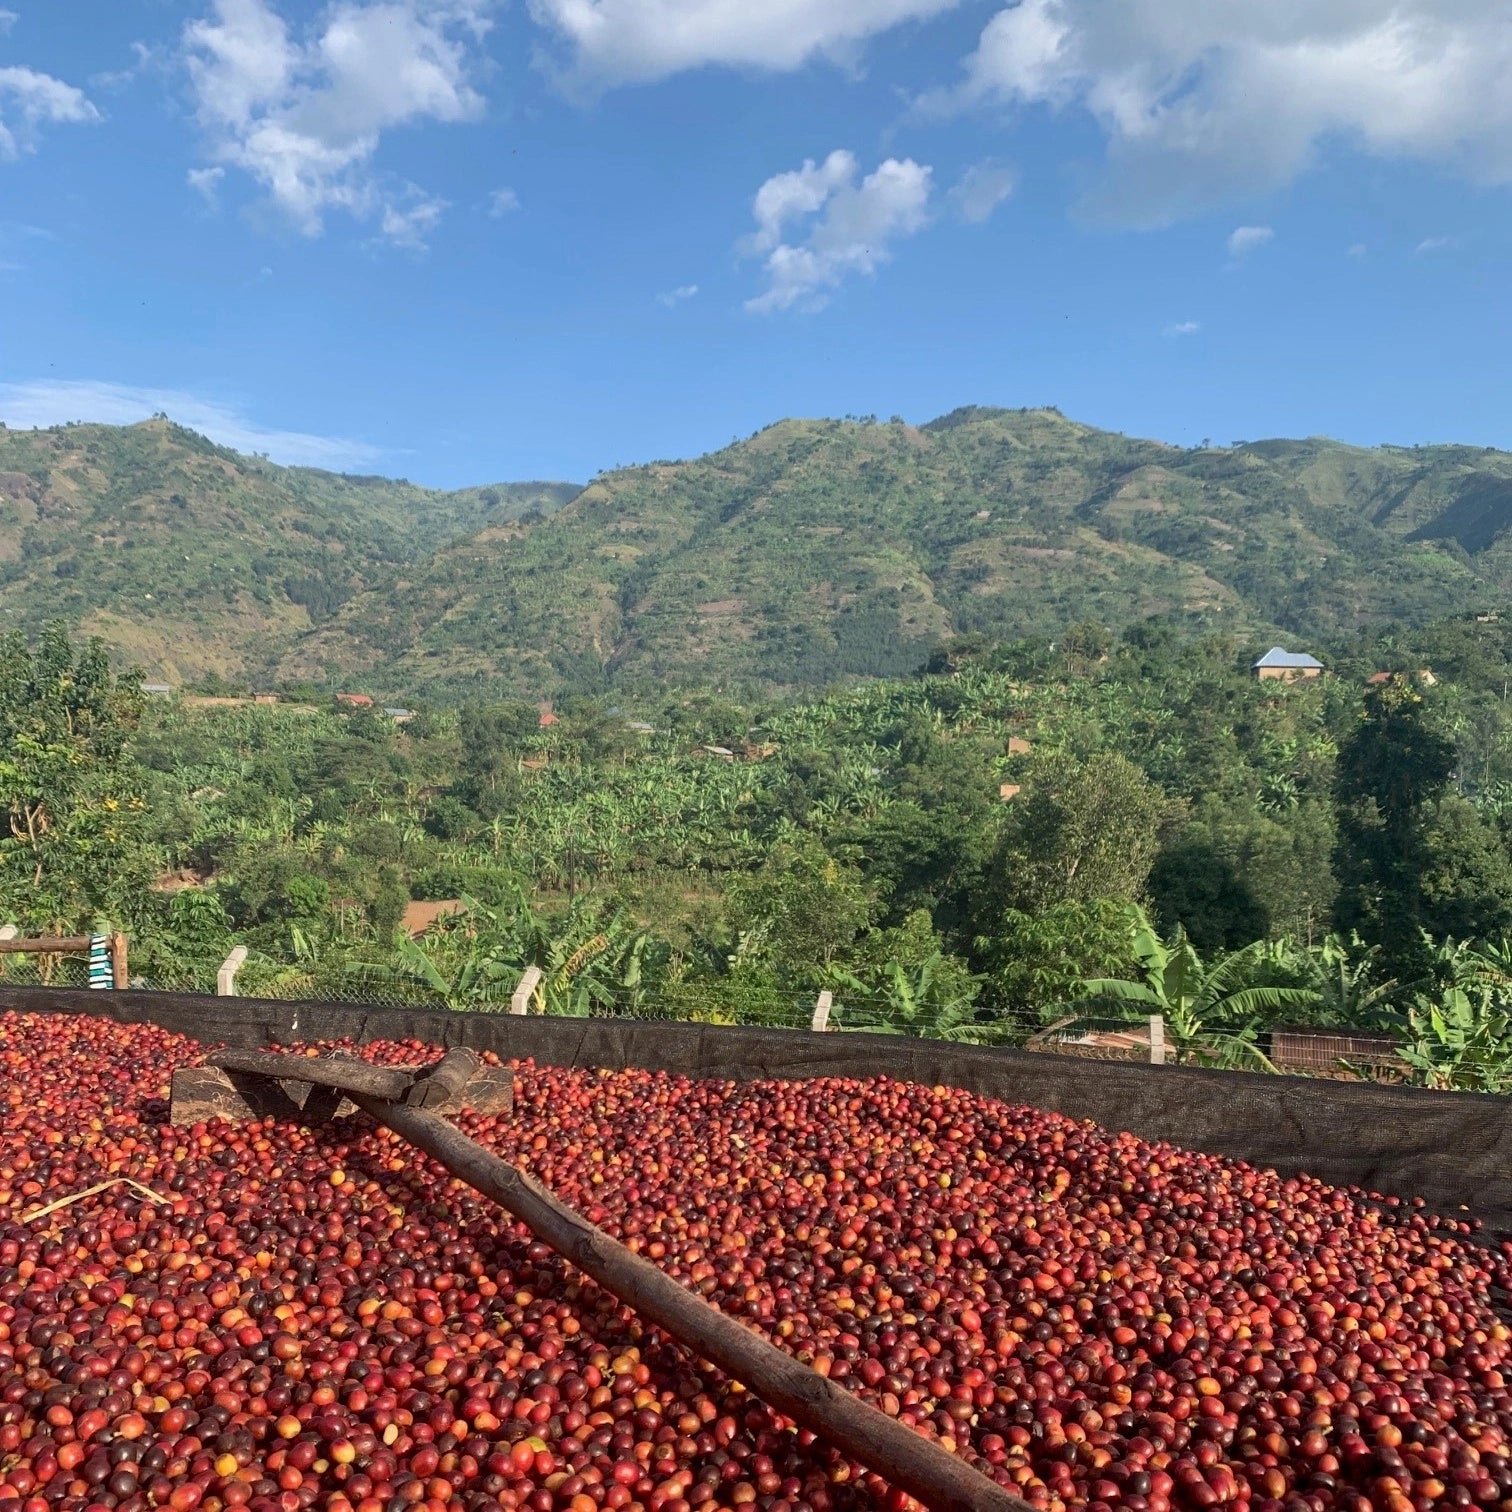 Ripe red speciality coffee cherries drying in the sun with the mountains of Uganda in the background